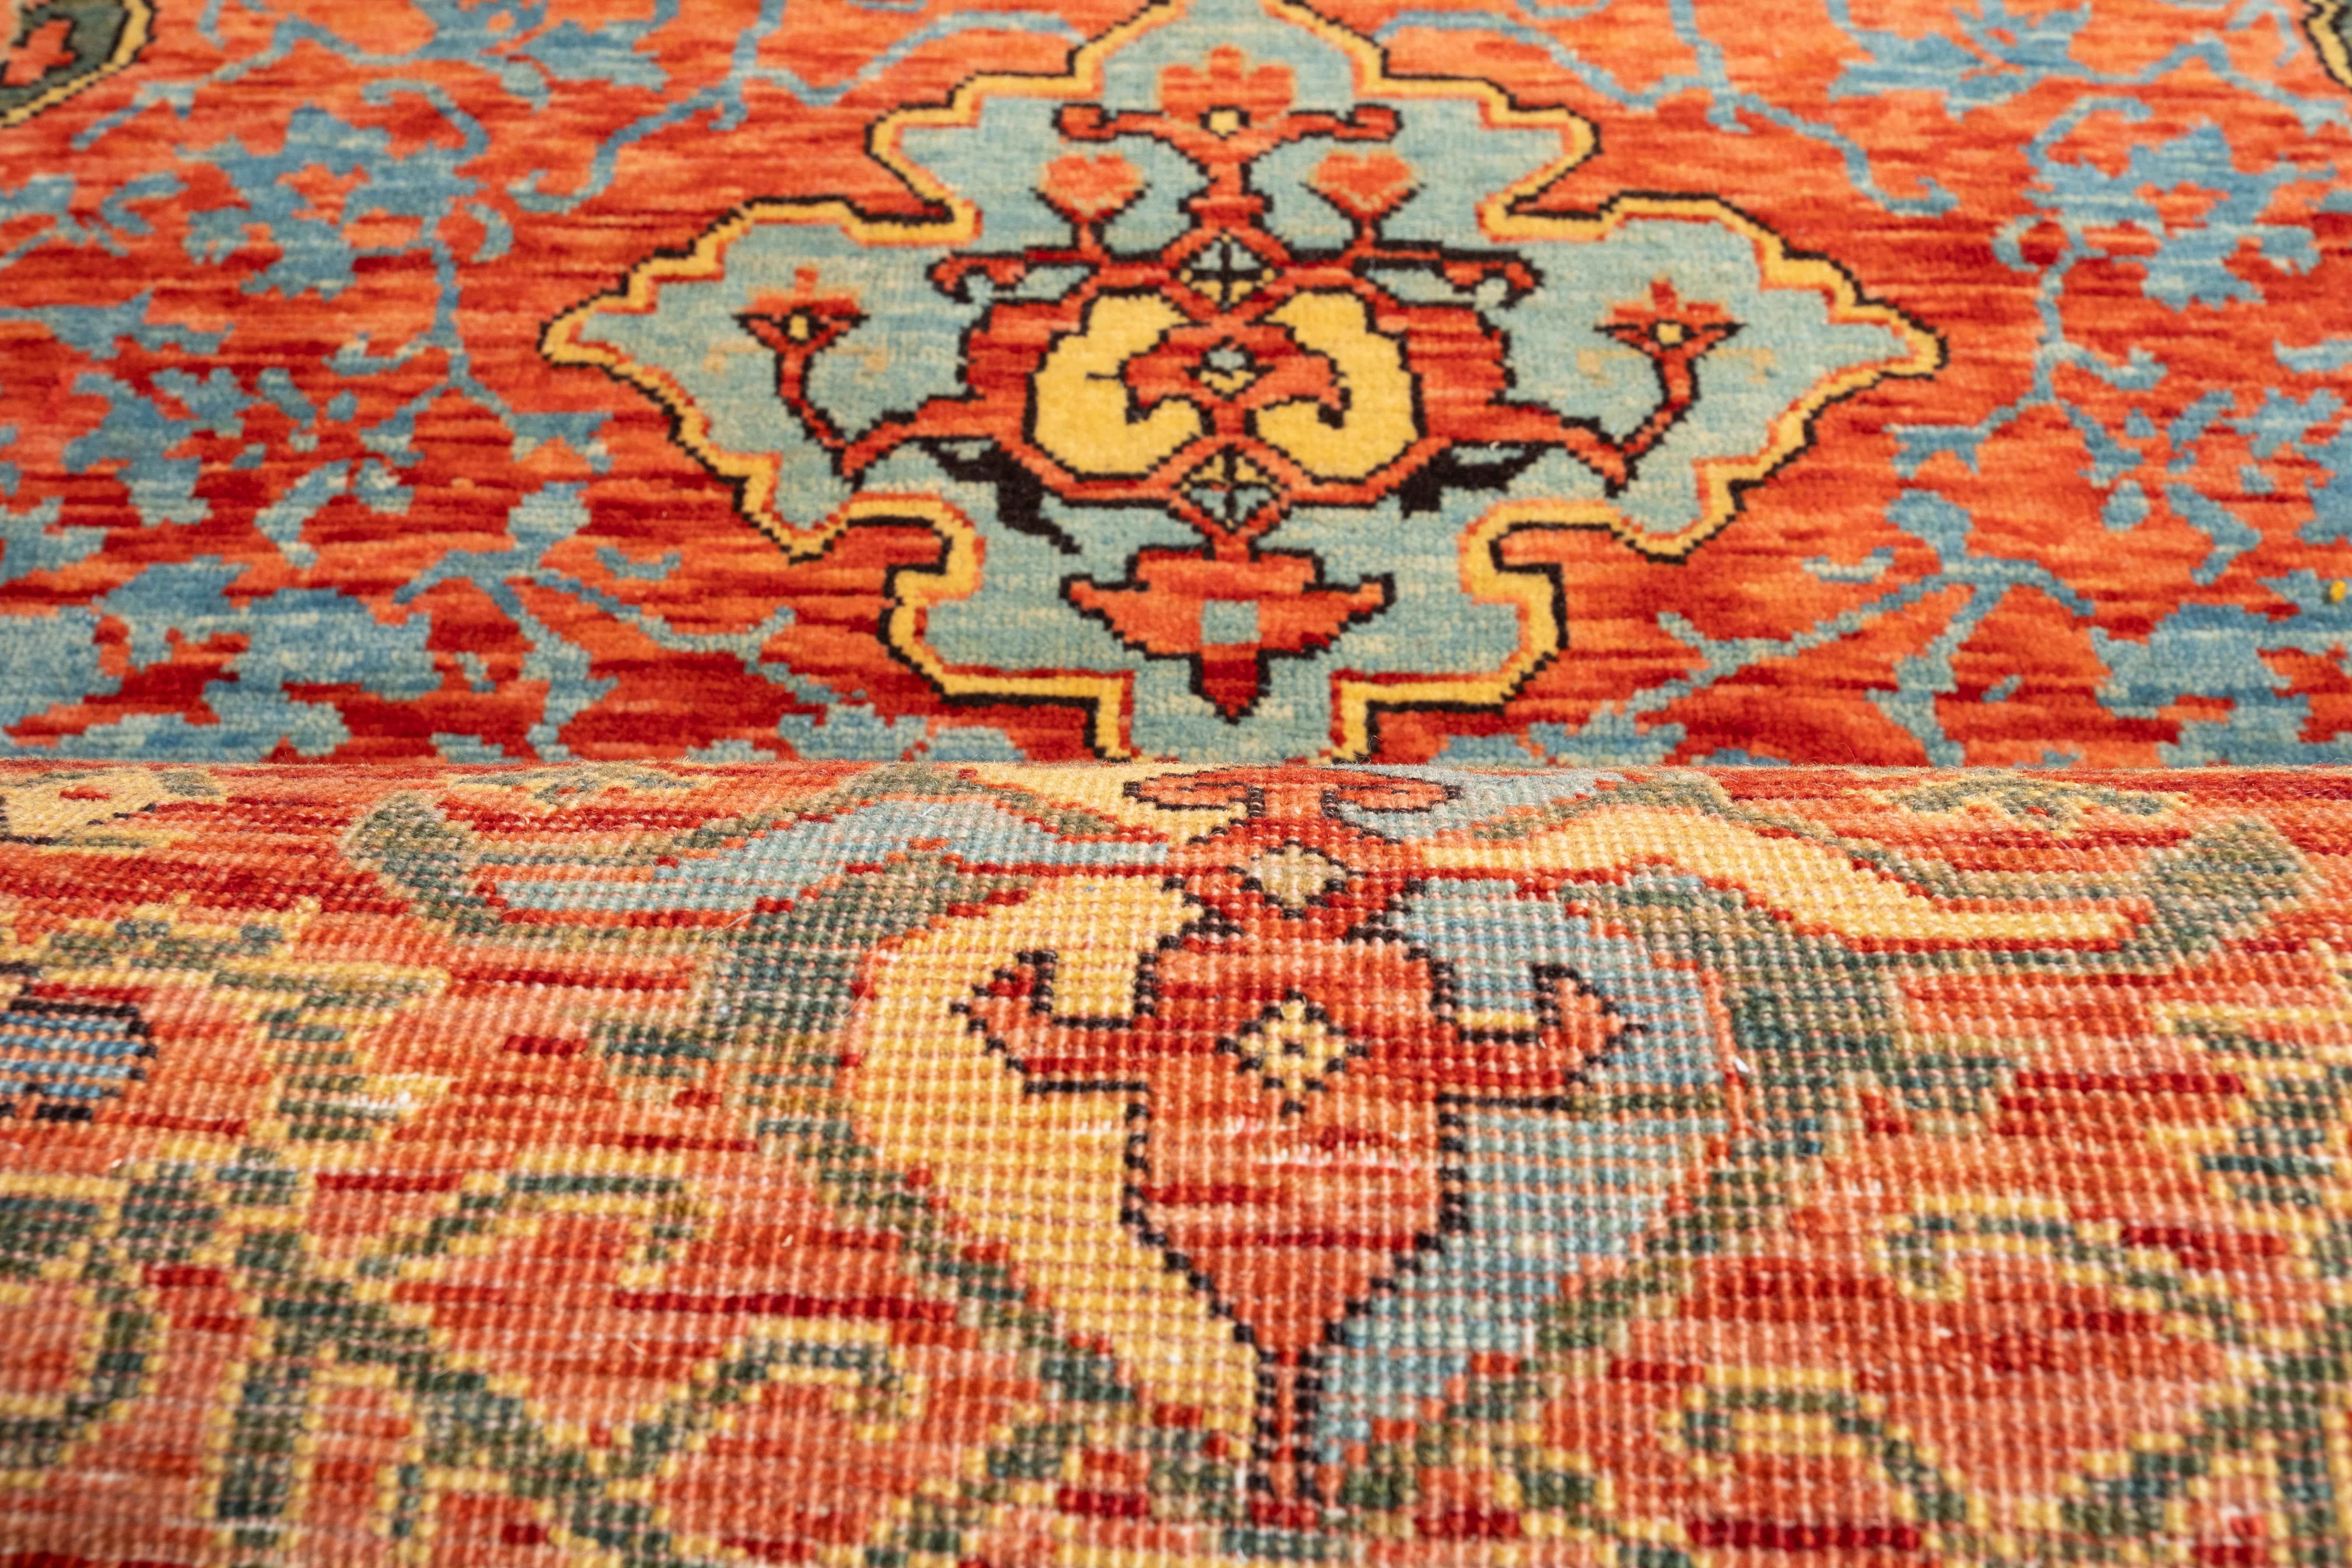 Wool Ararat Rugs Medallion Ushak Carpet Museum Piece 17th C. Revival Rug Natural Dyed For Sale